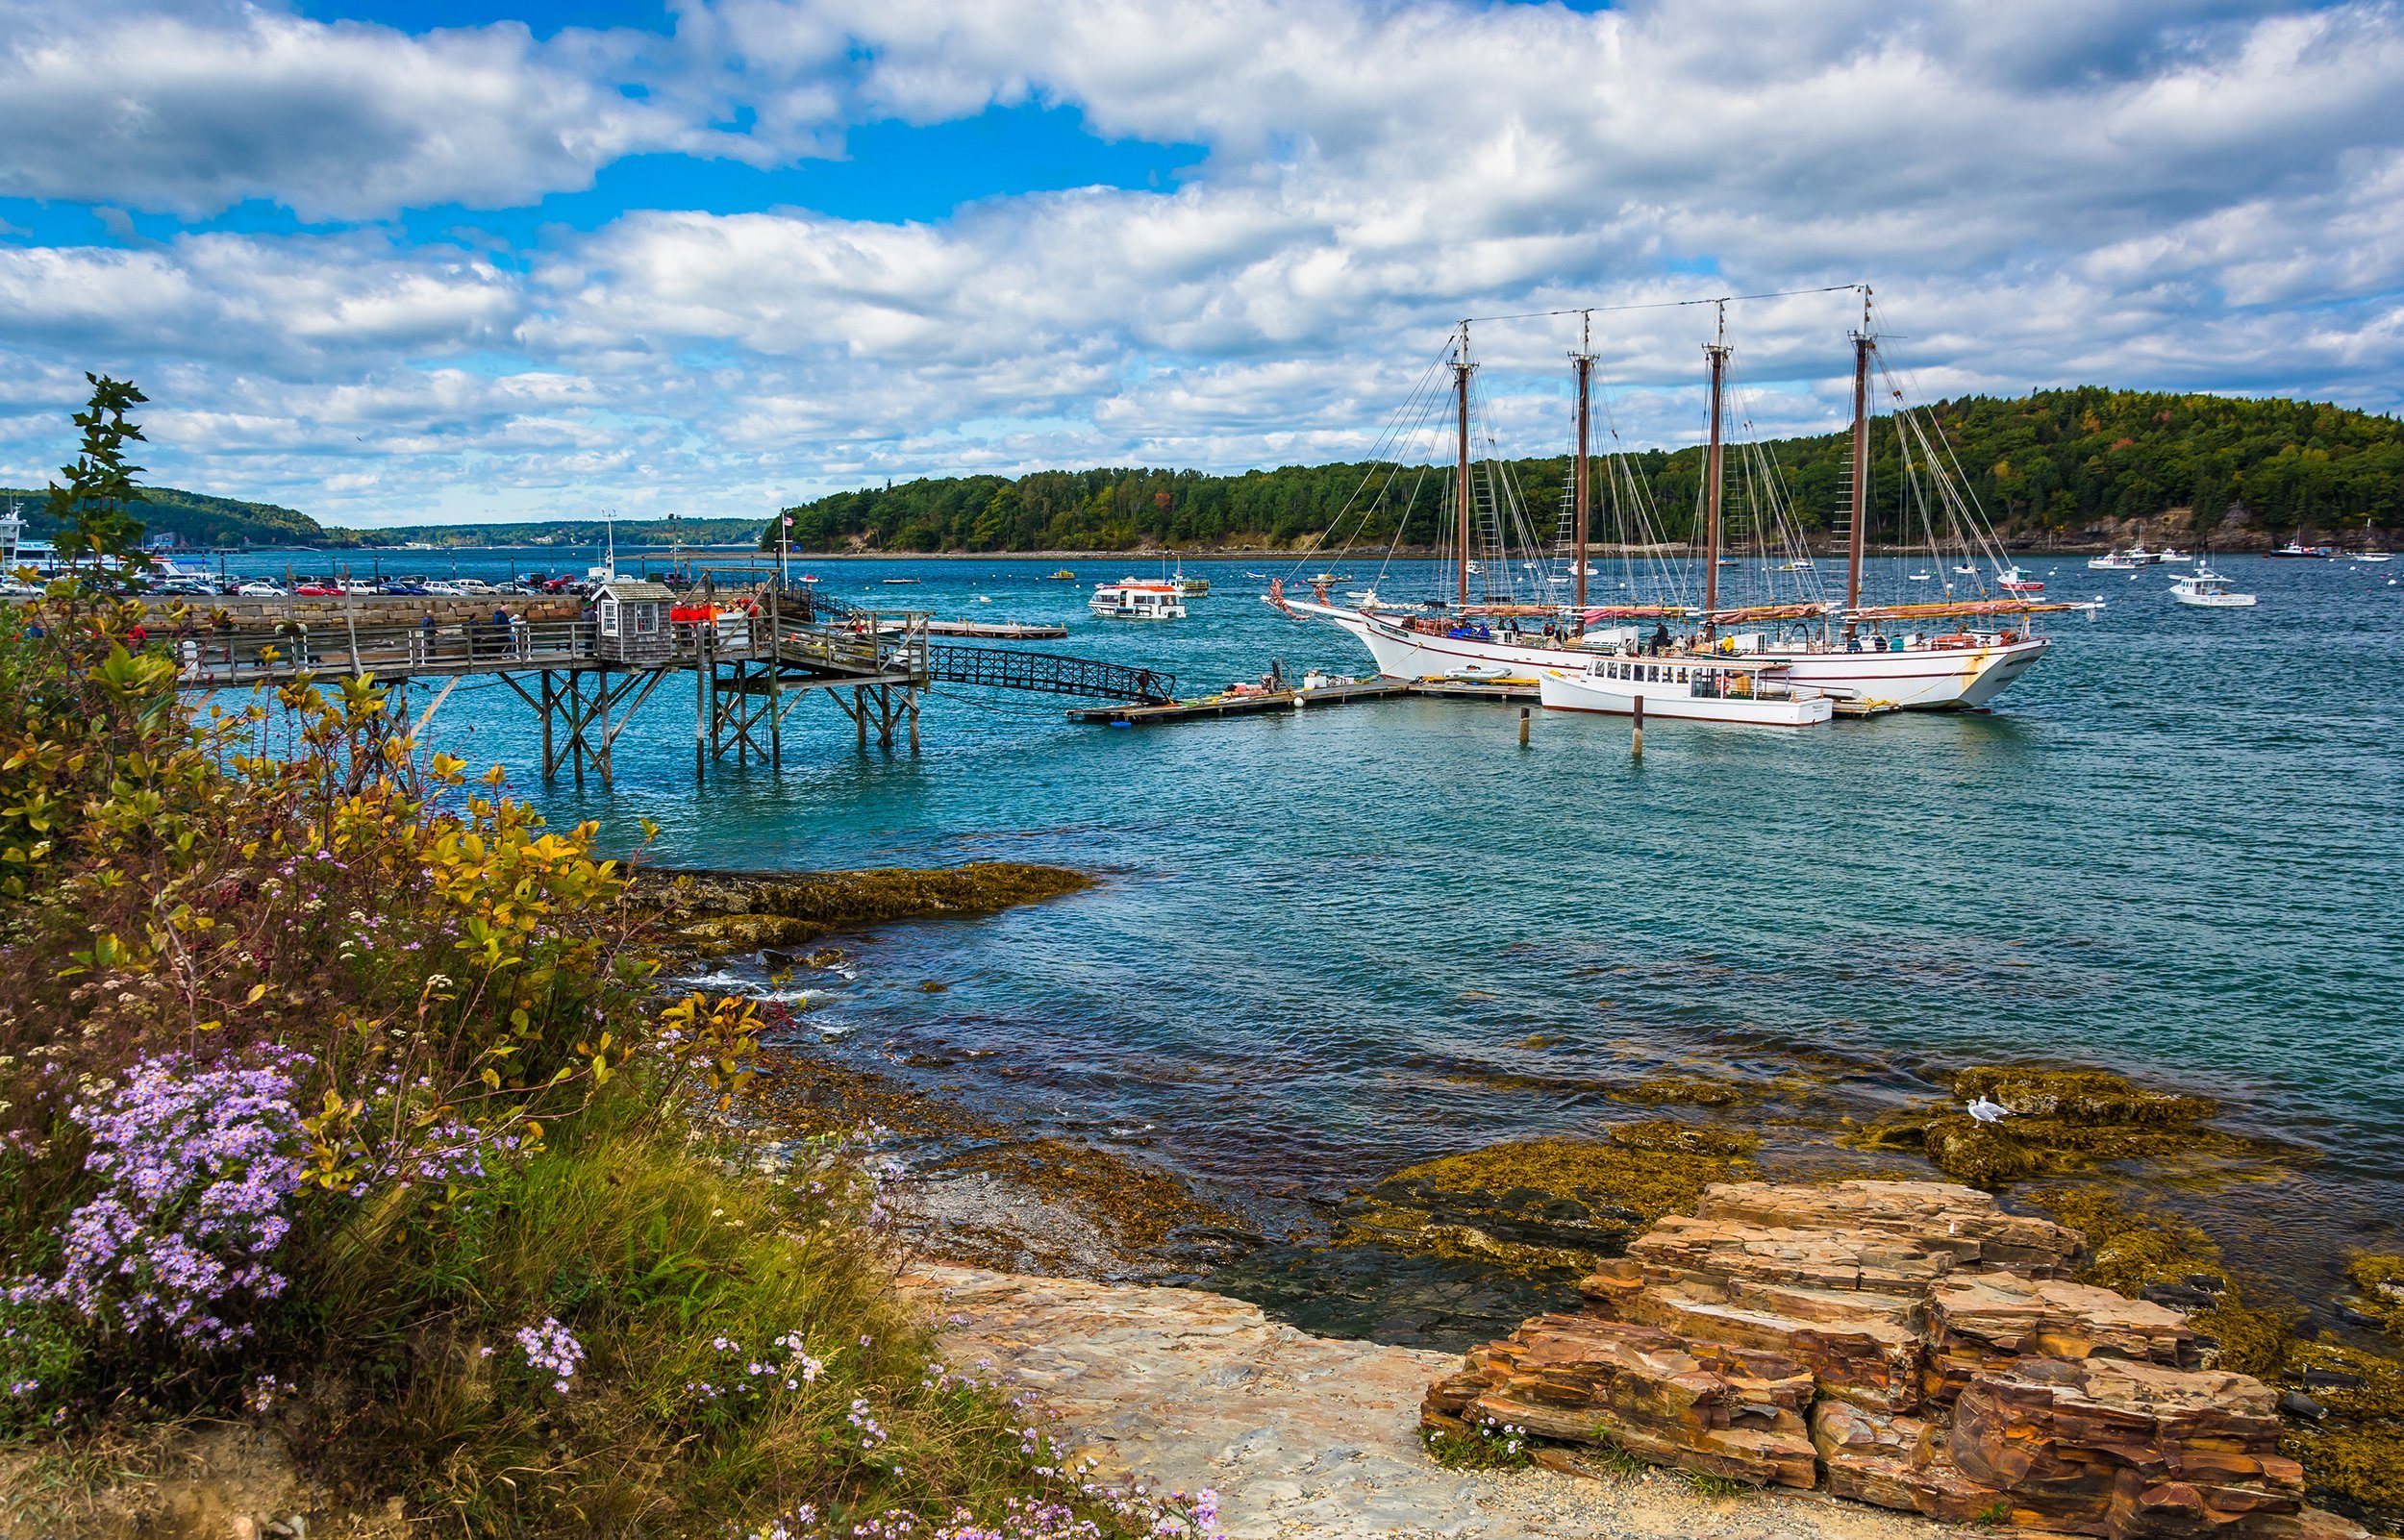 <p>Leave sunbathing to the Southeast. Bar Harbor, which embodies New England's rugged eastern coastline, is made for family vacations with a bit of action and adventure. Rocky, rustic, and natural, the beach is nestled between the North Atlantic and the mountains, lakes, and rugged coastline of Maine's Acadia National Park.</p><p><b>Related:</b> <a href="https://blog.cheapism.com/best-seafood-shacks/">Amazing Seafood Shacks to Visit in Maine and Across America</a></p>